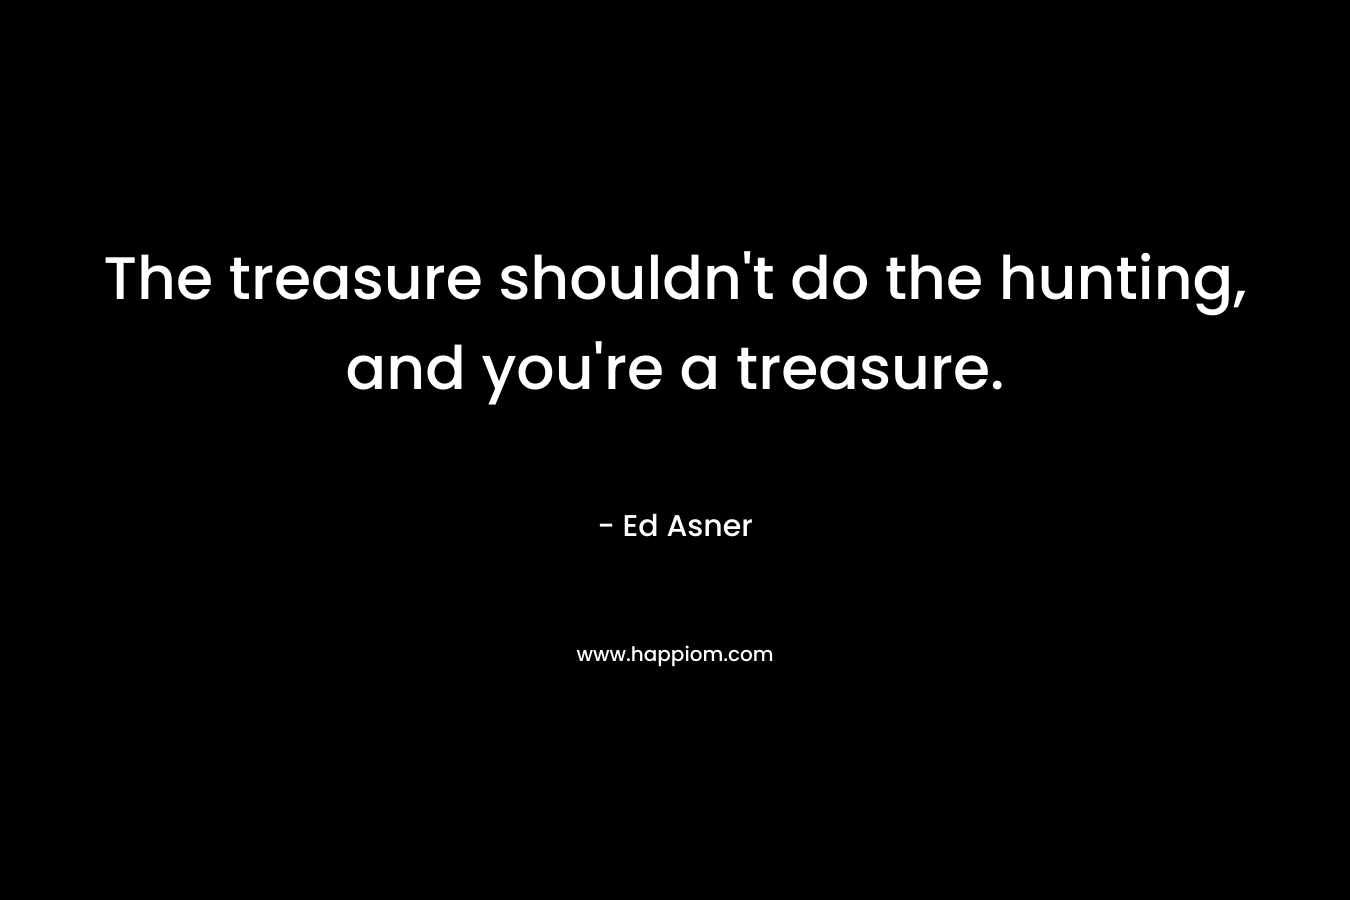 The treasure shouldn't do the hunting, and you're a treasure.